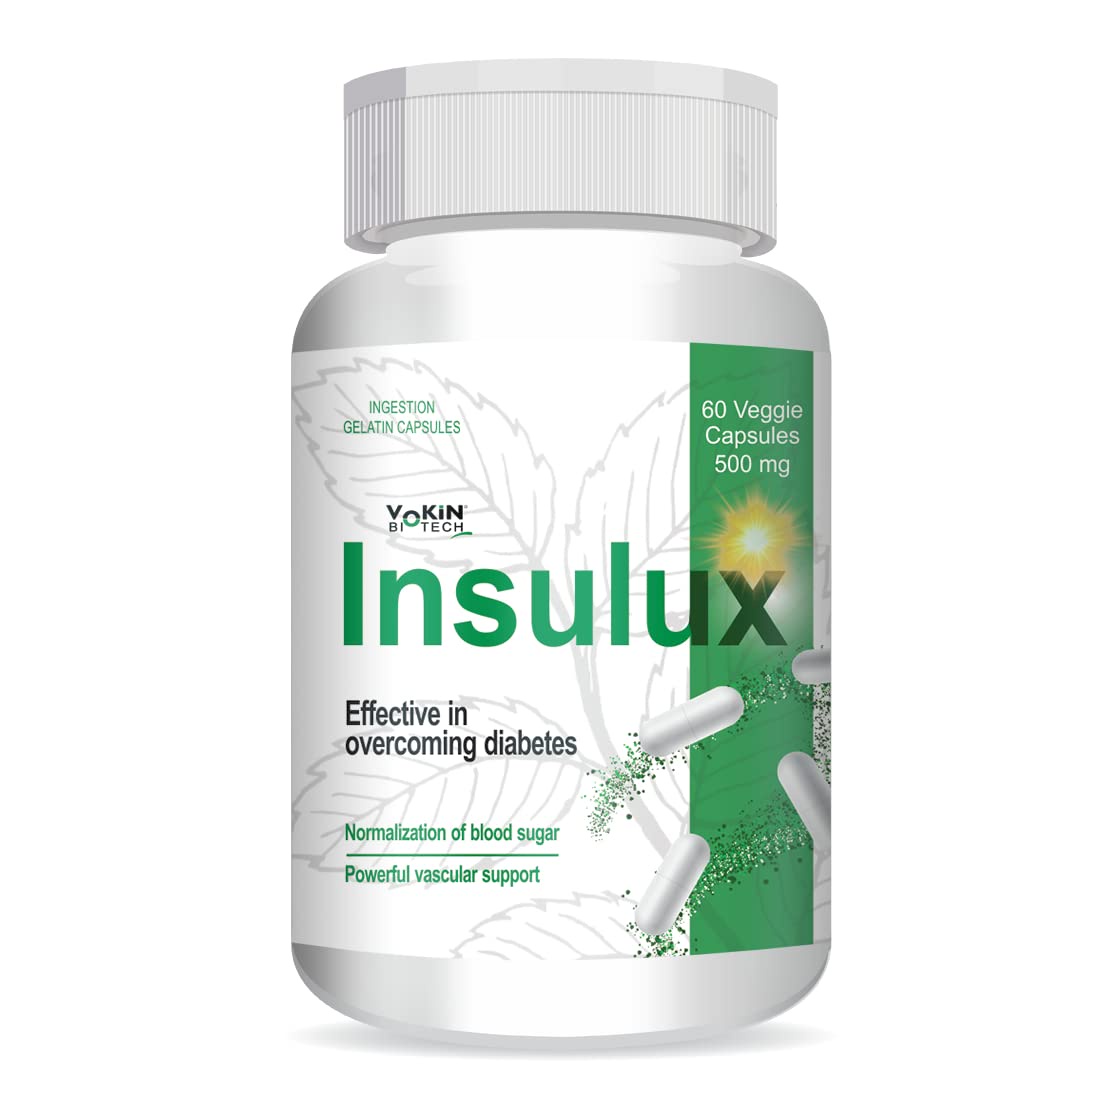 Insulux - Regulates Blood Sugar & Diabetes! Examine the Cost In 2022*Order On Official Website*